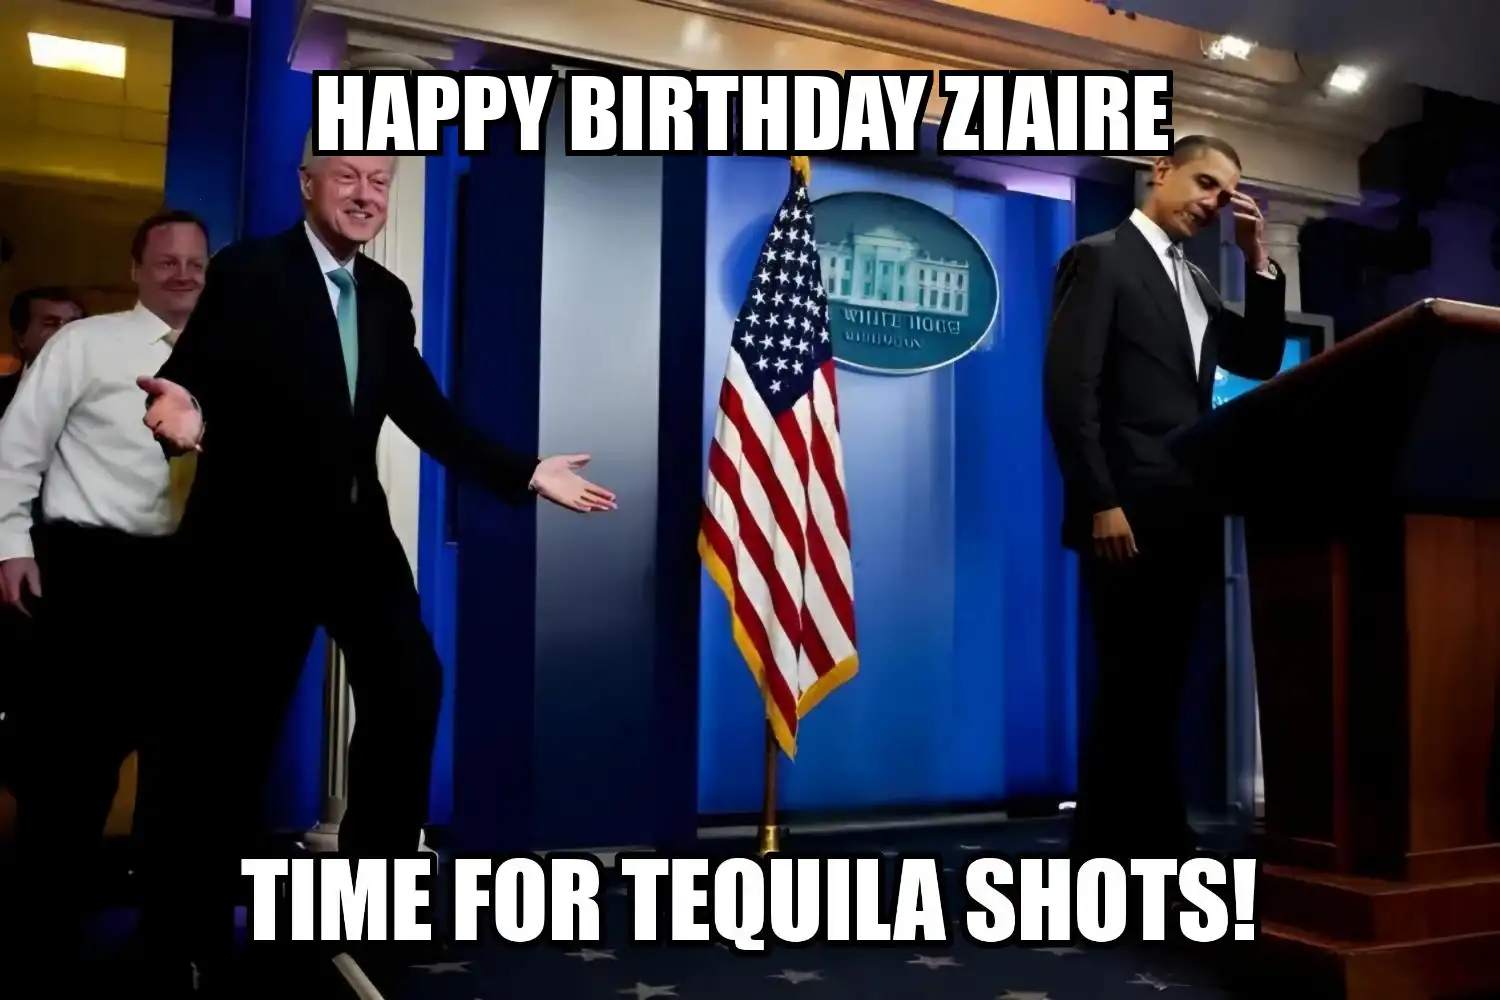 Happy Birthday Ziaire Time For Tequila Shots Memes